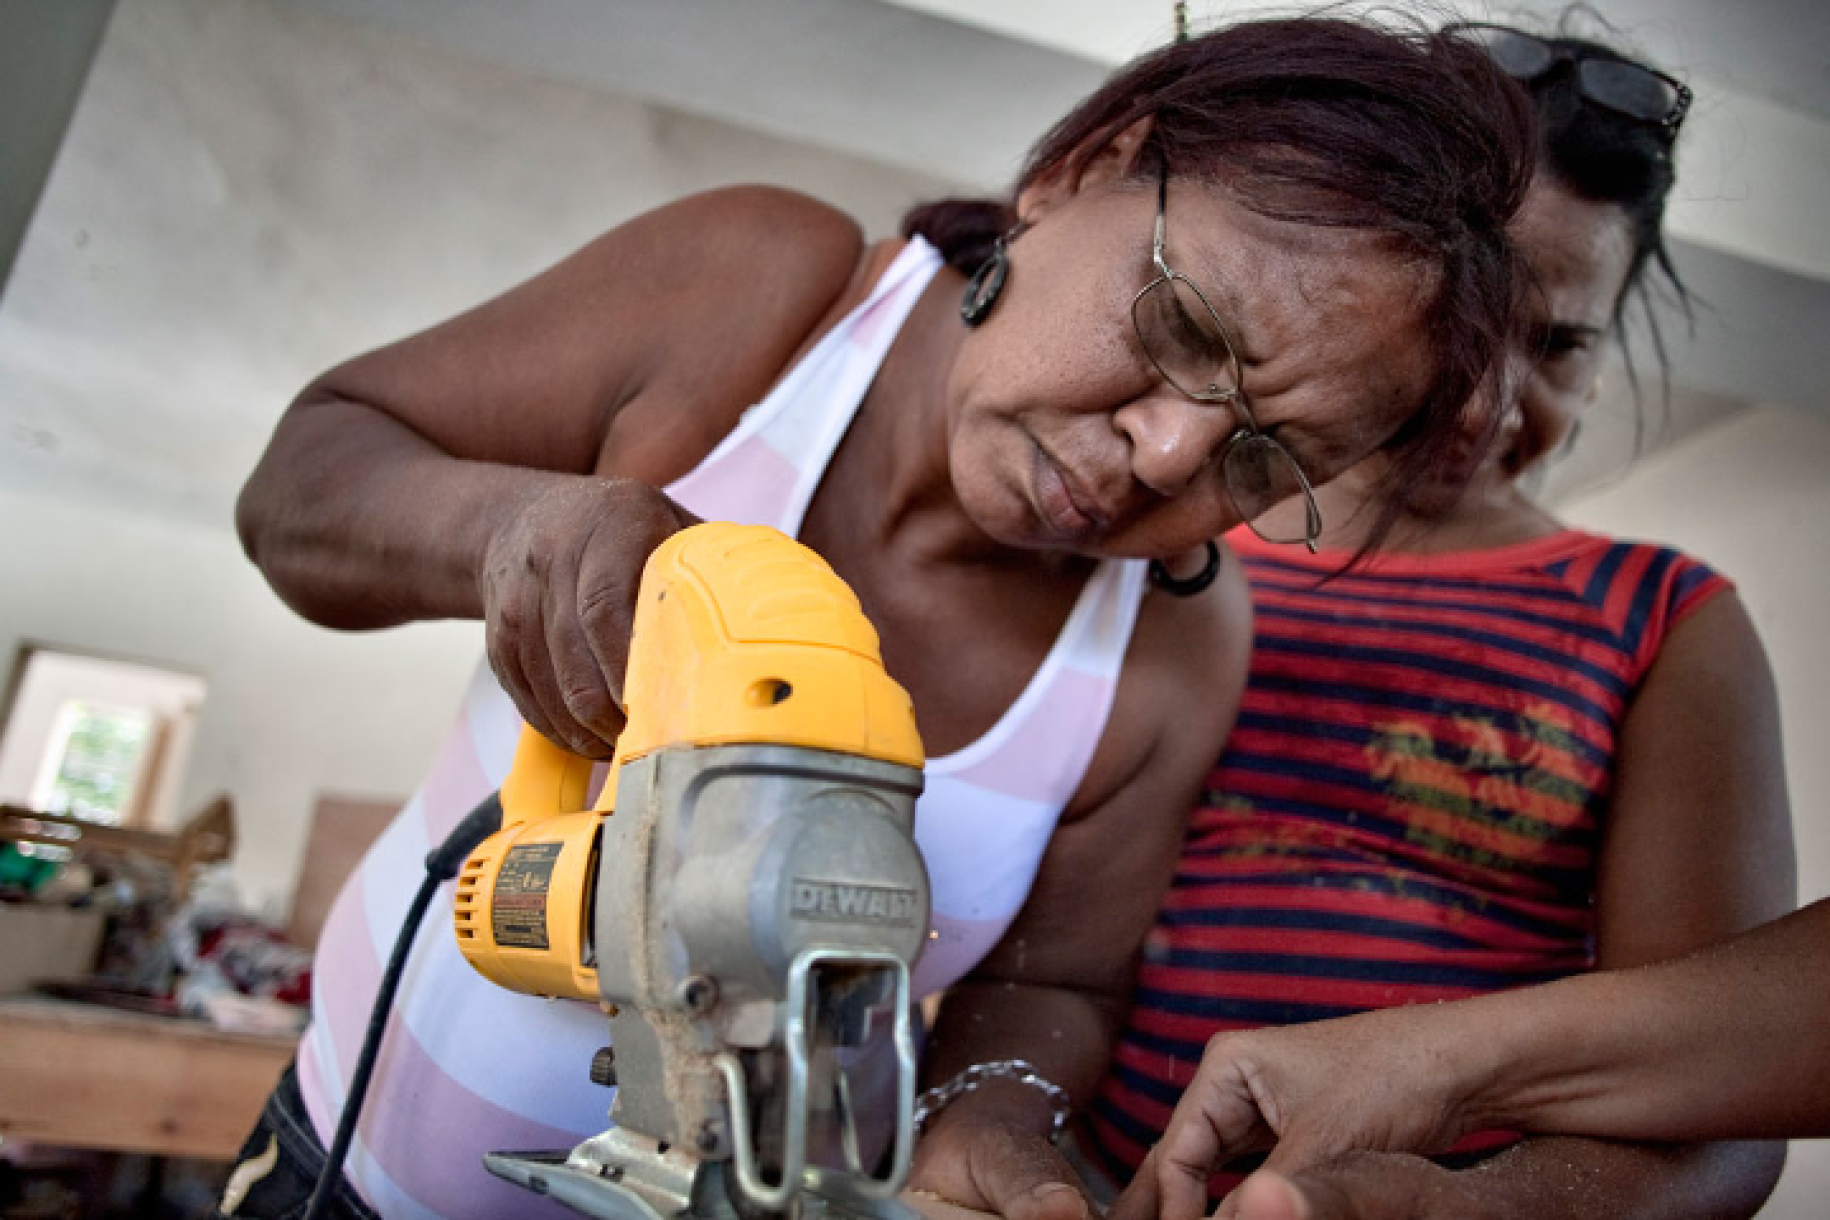 A woman uses a handsaw on the job at a workshop in the Dominican Republic. 